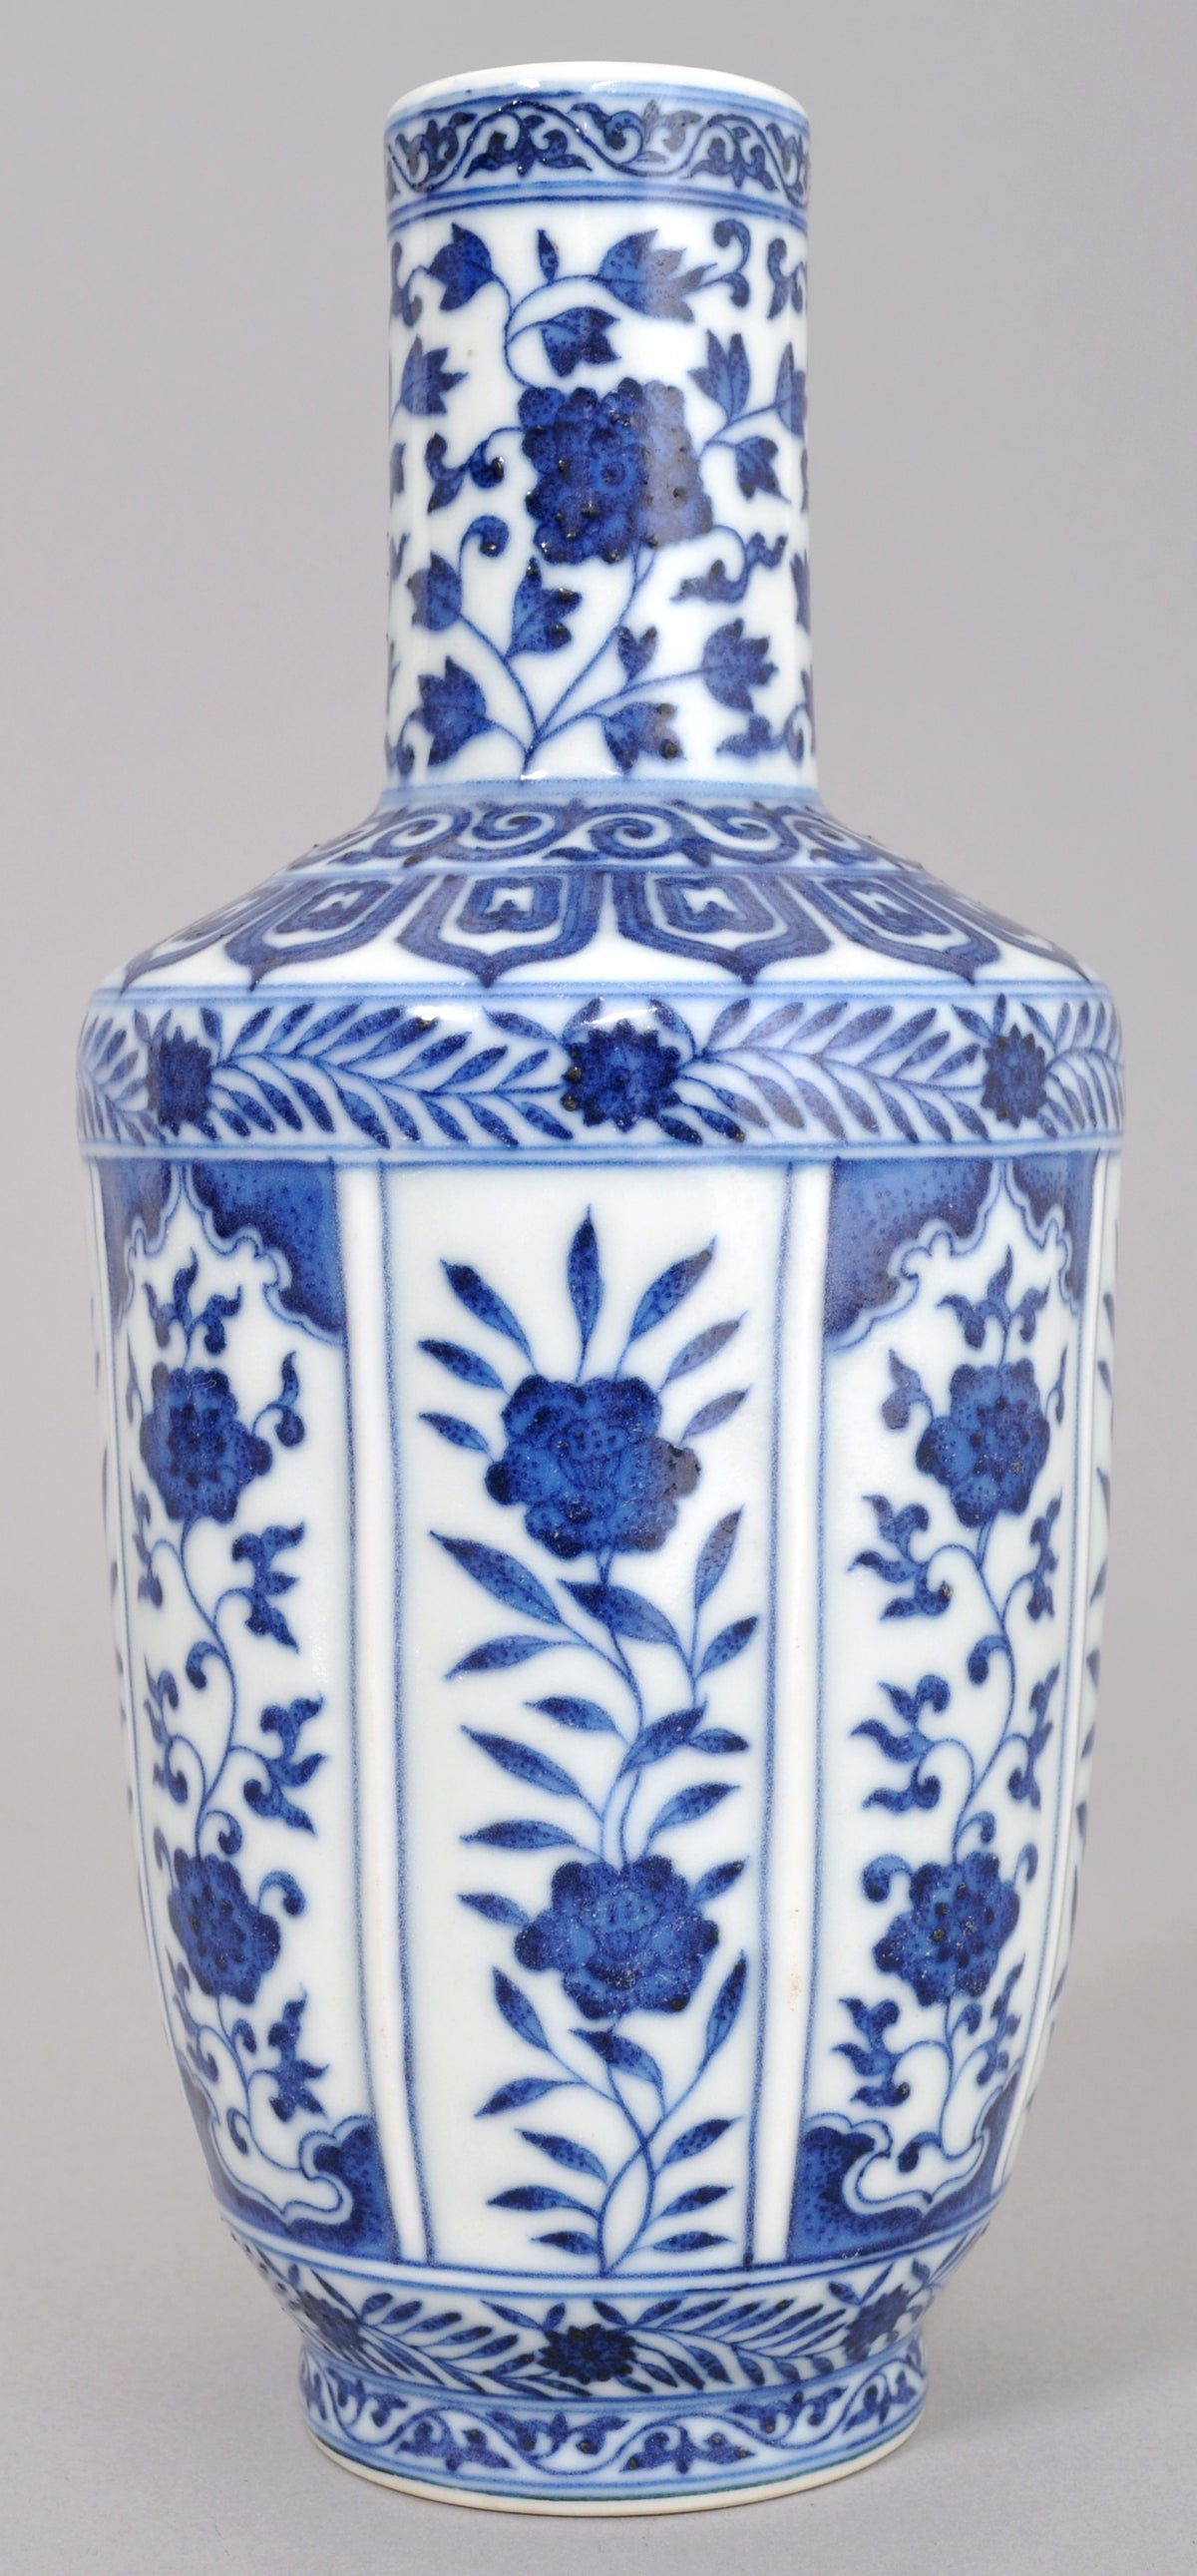 Antique 19th Century Chinese Blue and White Porcelain 'Sleeve' Vase, Circa 1850